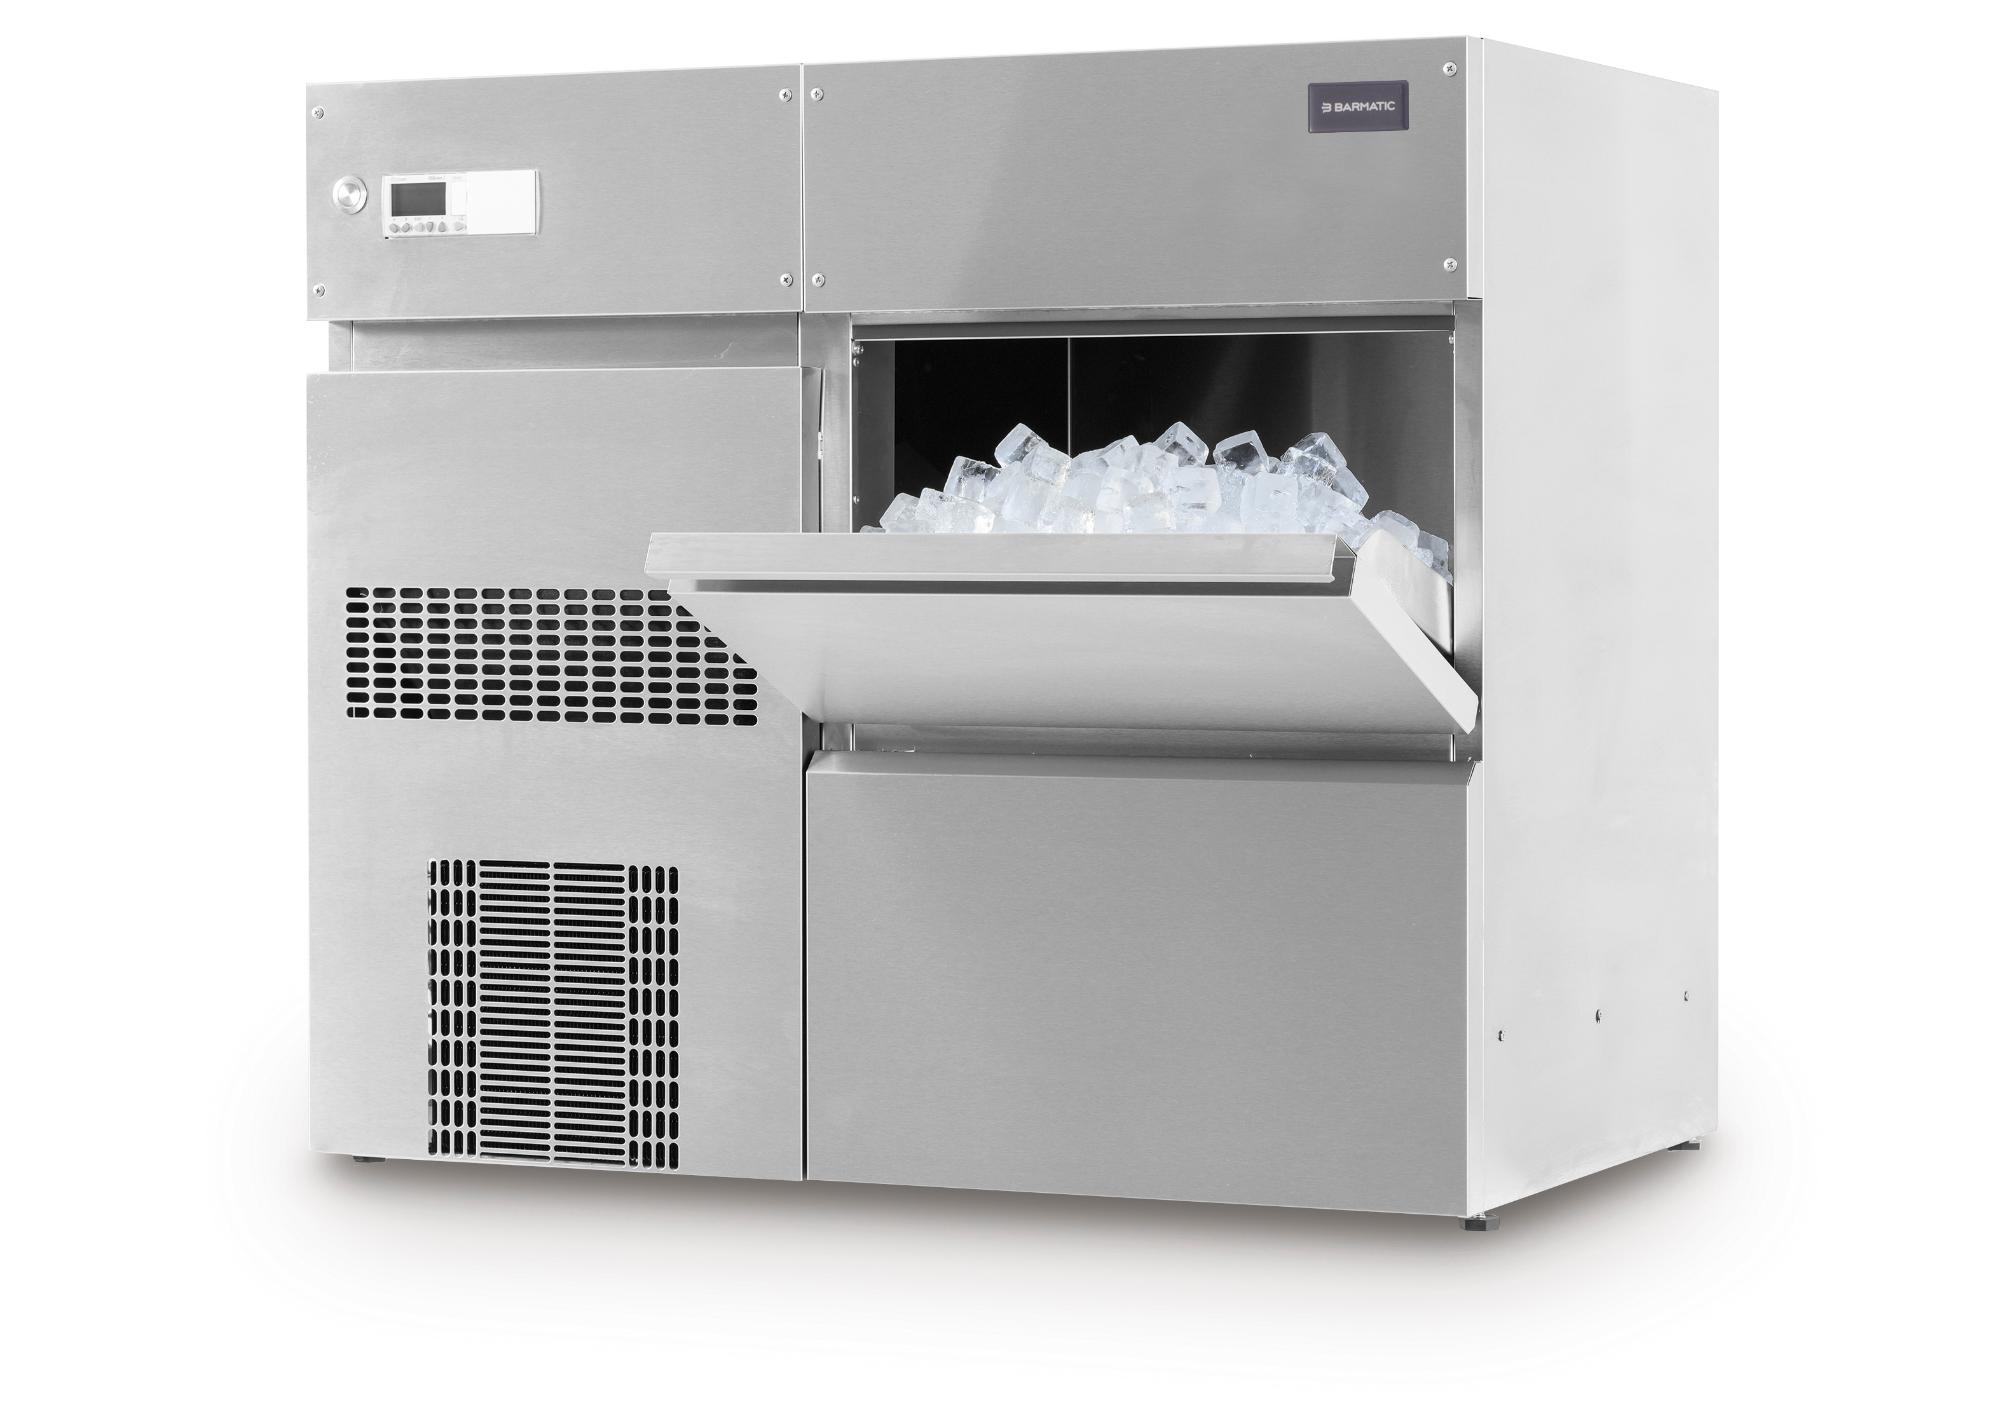 Firmness under-counter 65kg/24h water-cooled ice cube maker